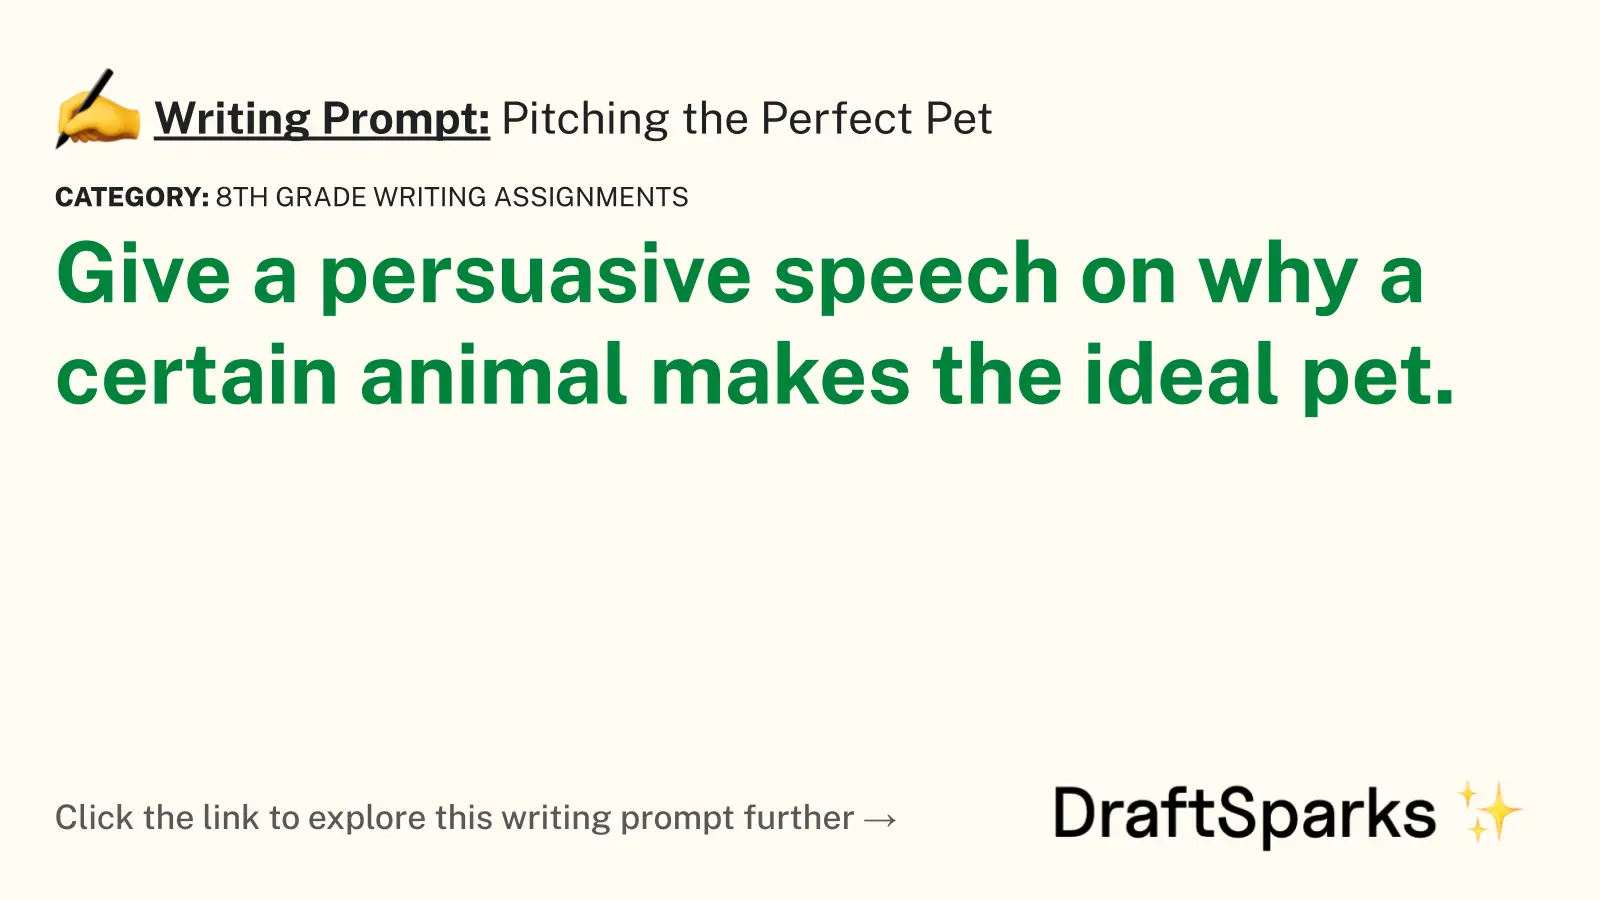 Pitching the Perfect Pet